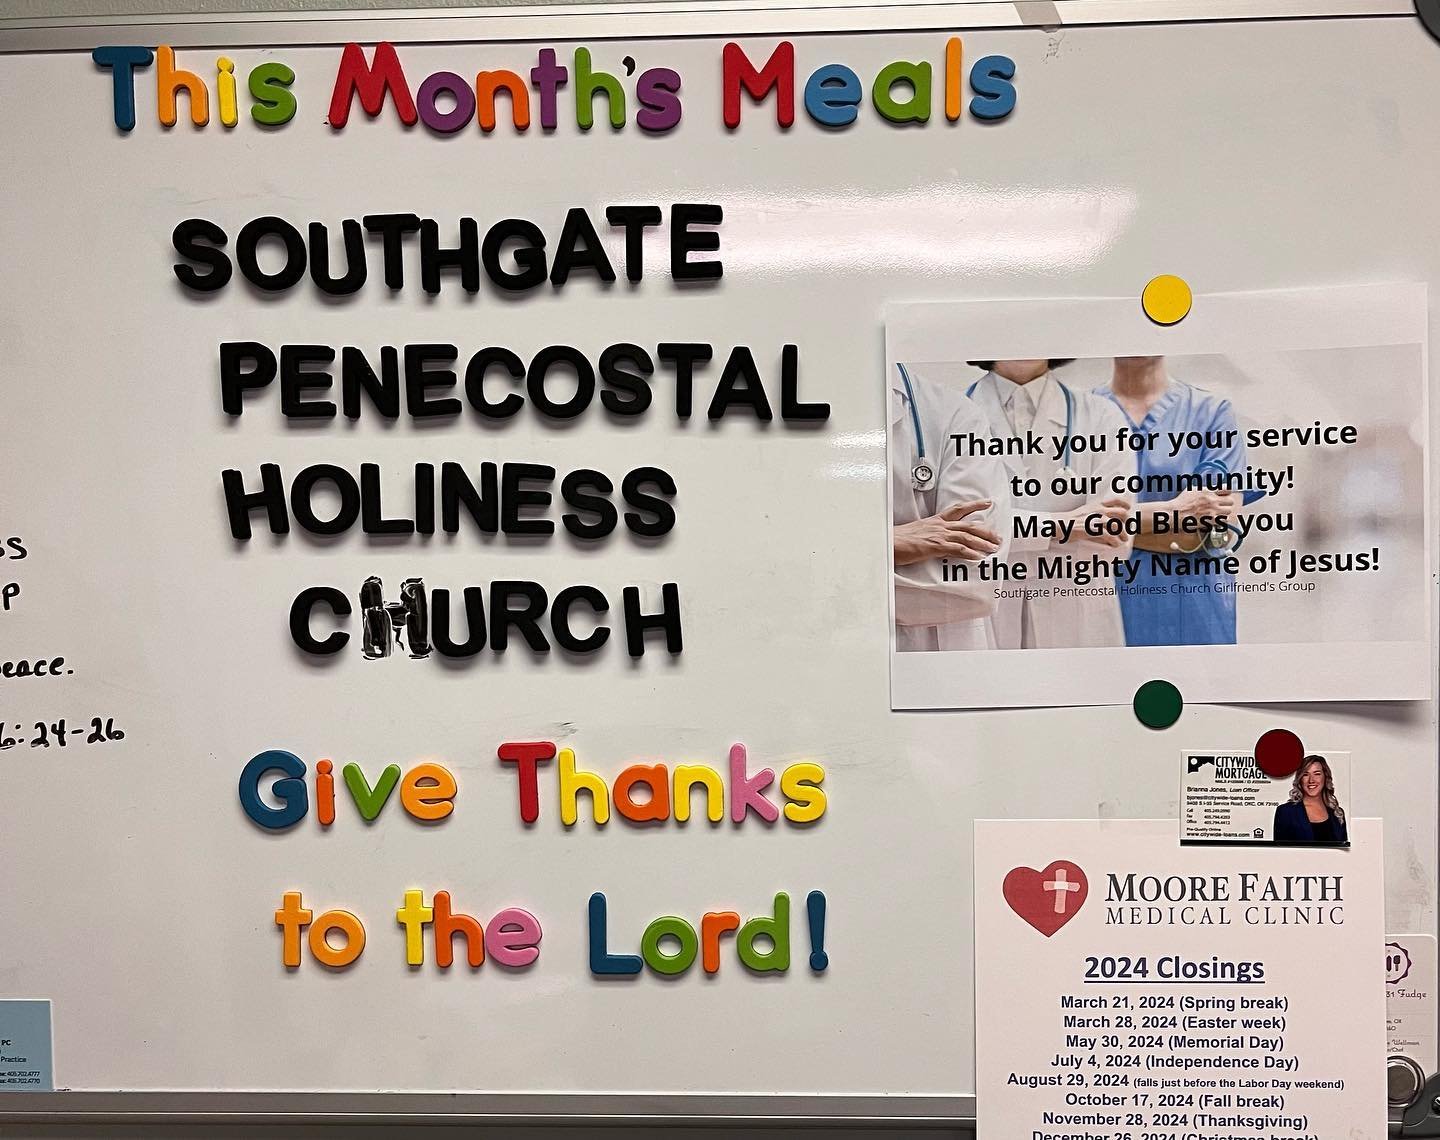 Another amazing dinner provided by another amazing partner! We are so thankful for Rosie and the girlfriends of the Southgate Pentecostal Holiness Church of Moore.